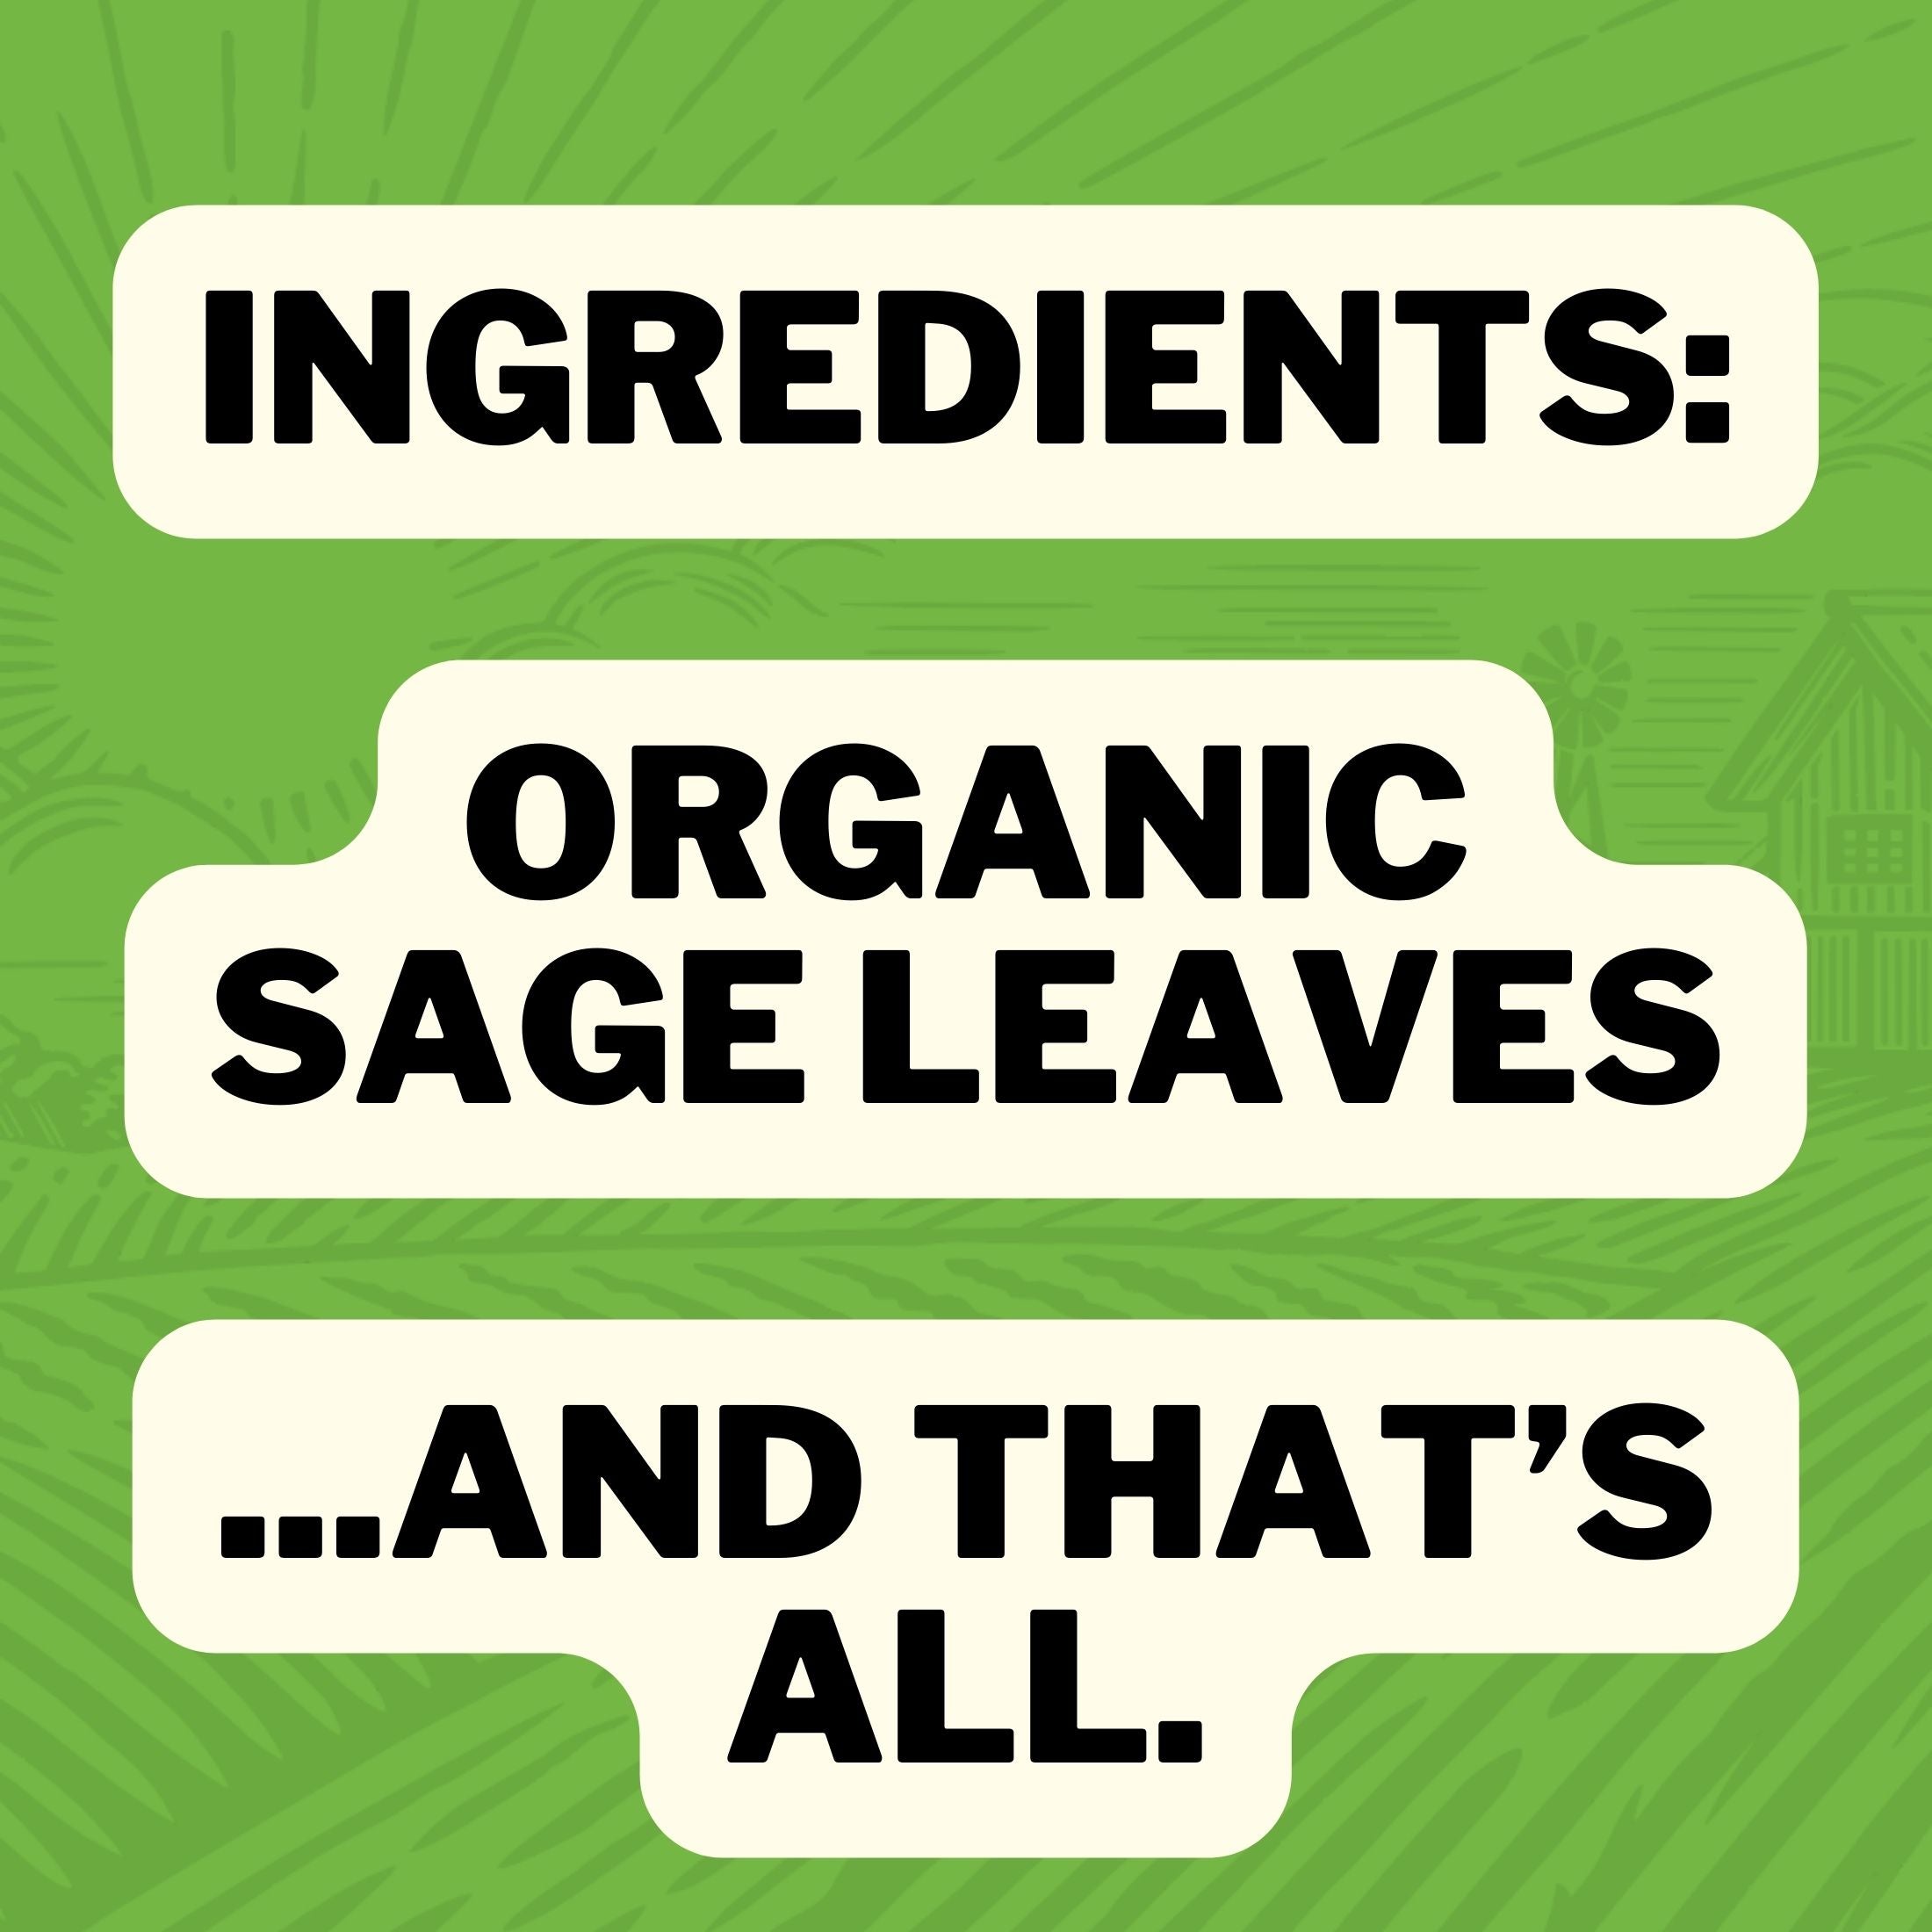 Ingredients: Organic Sage Leaves... and that's all.